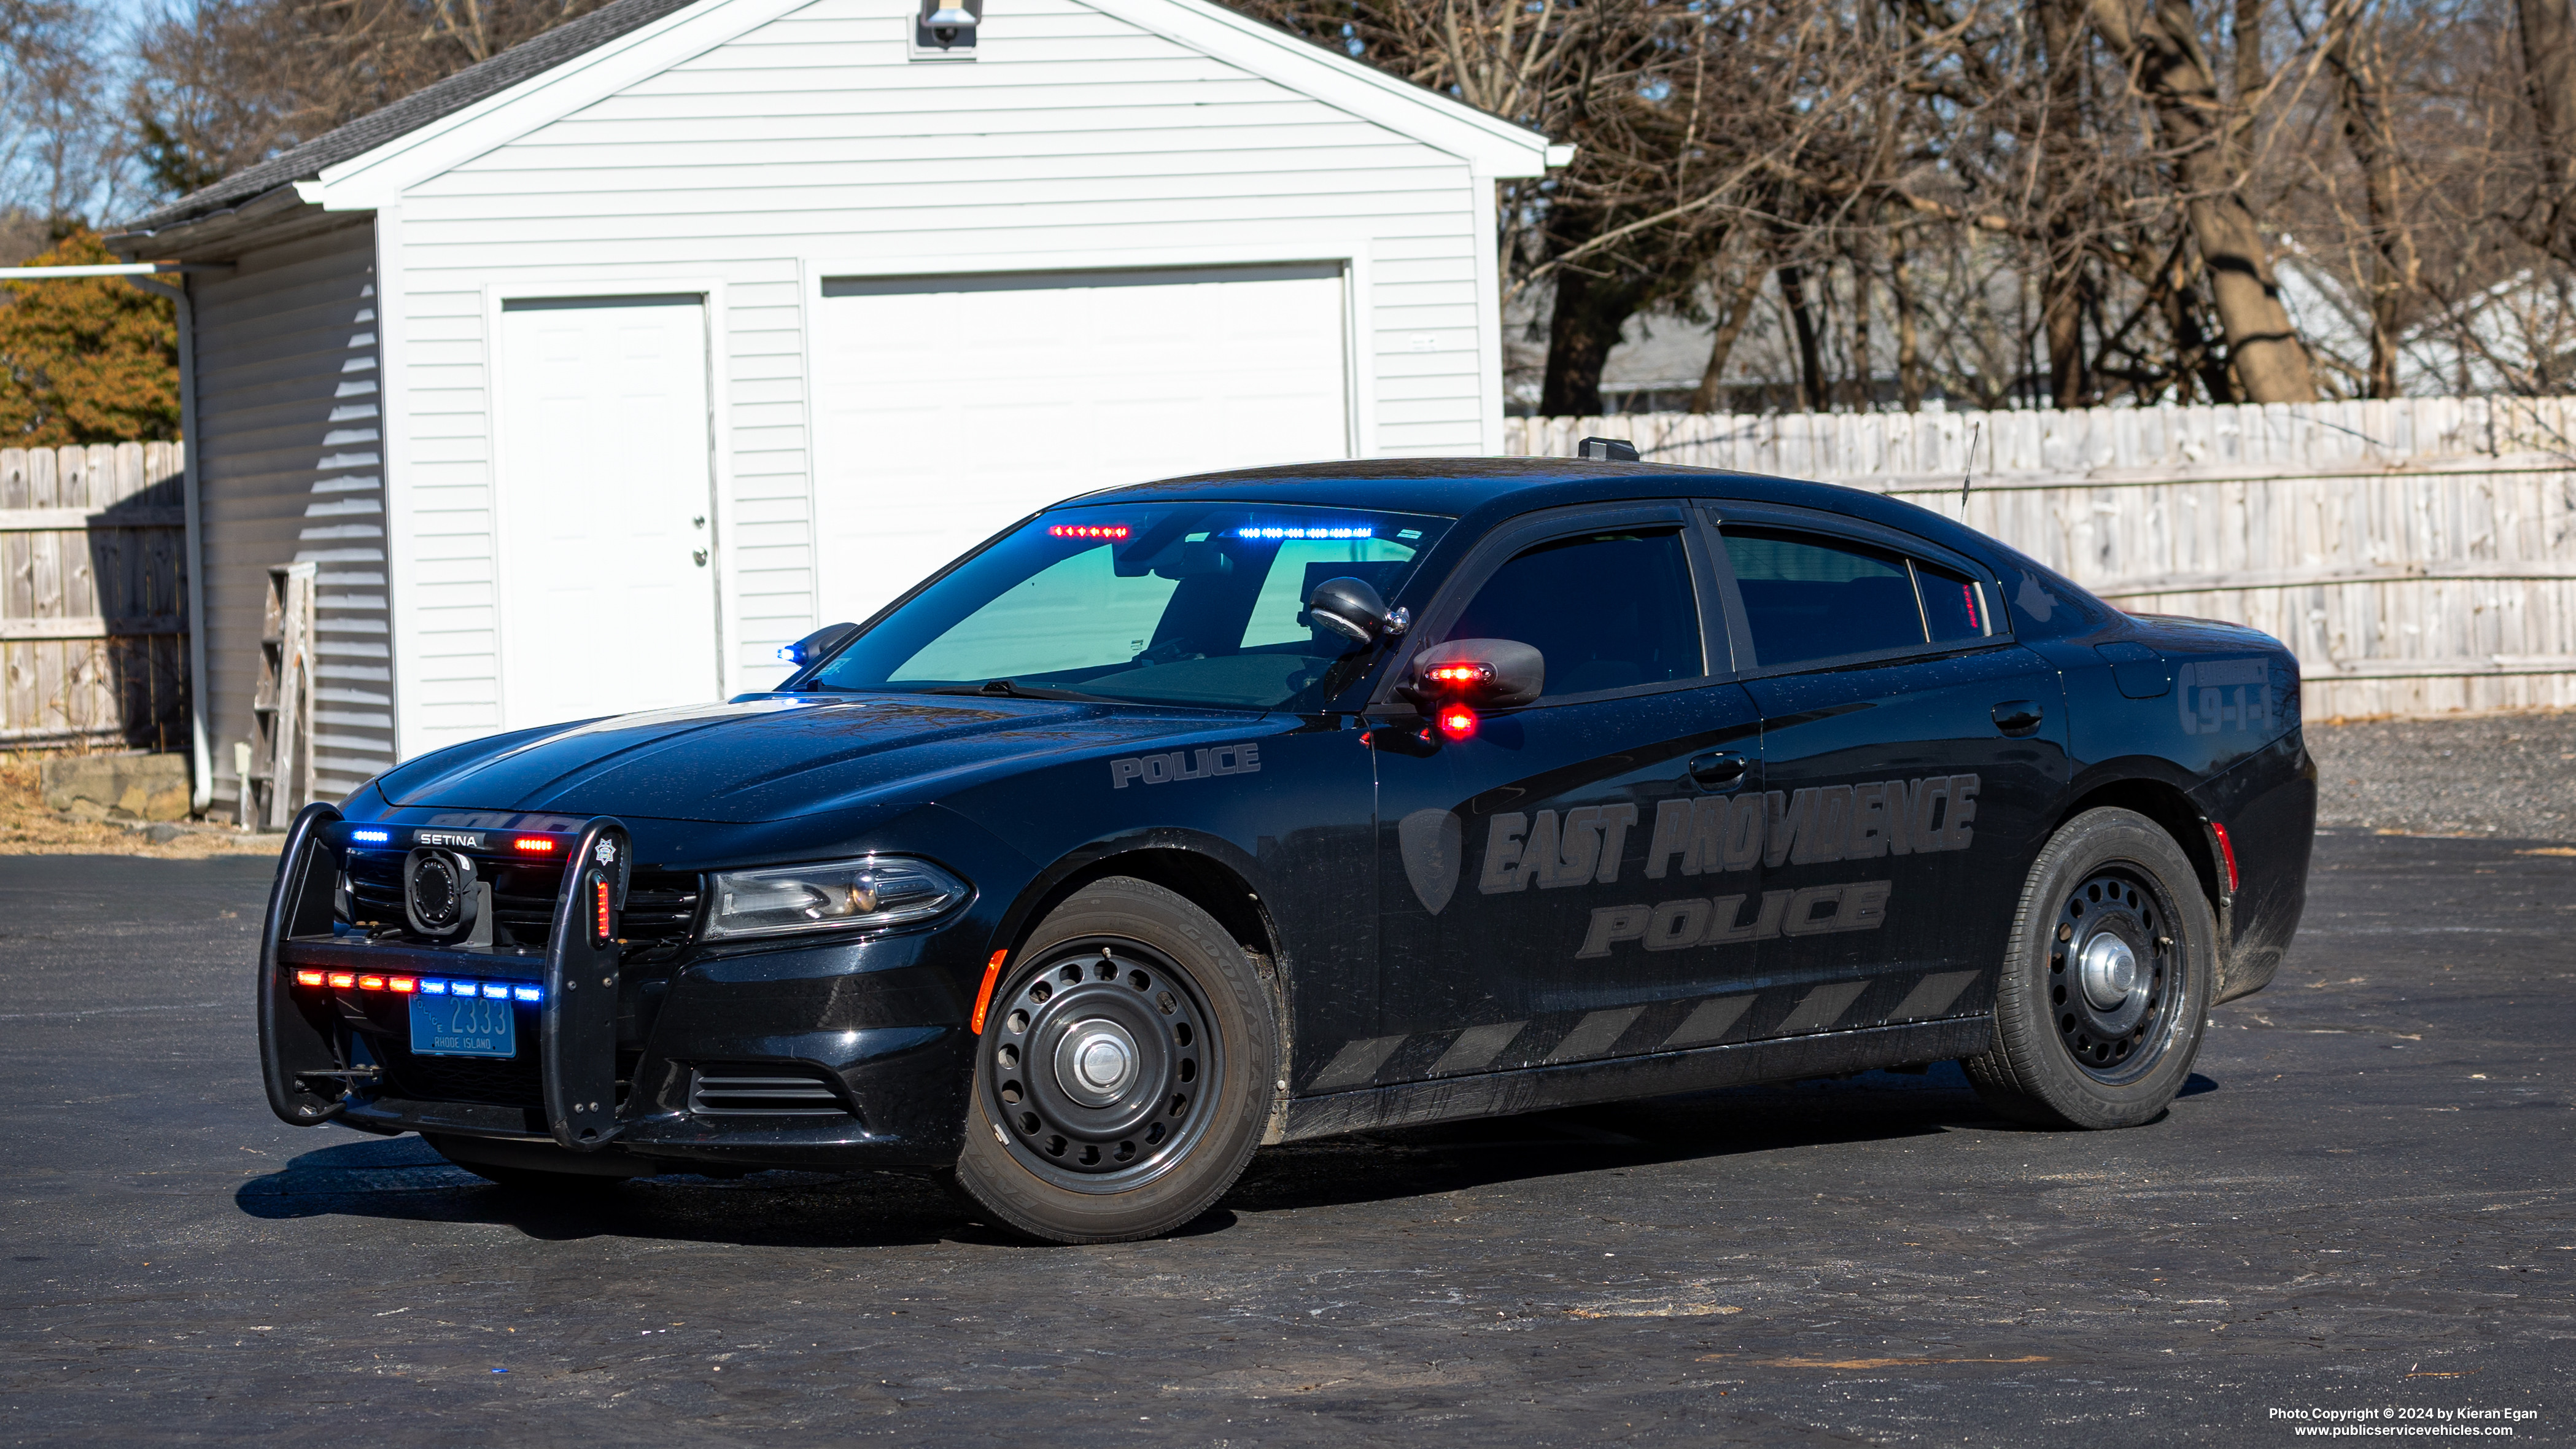 A photo  of East Providence Police
            Car [2]32, a 2018 Dodge Charger             taken by Kieran Egan